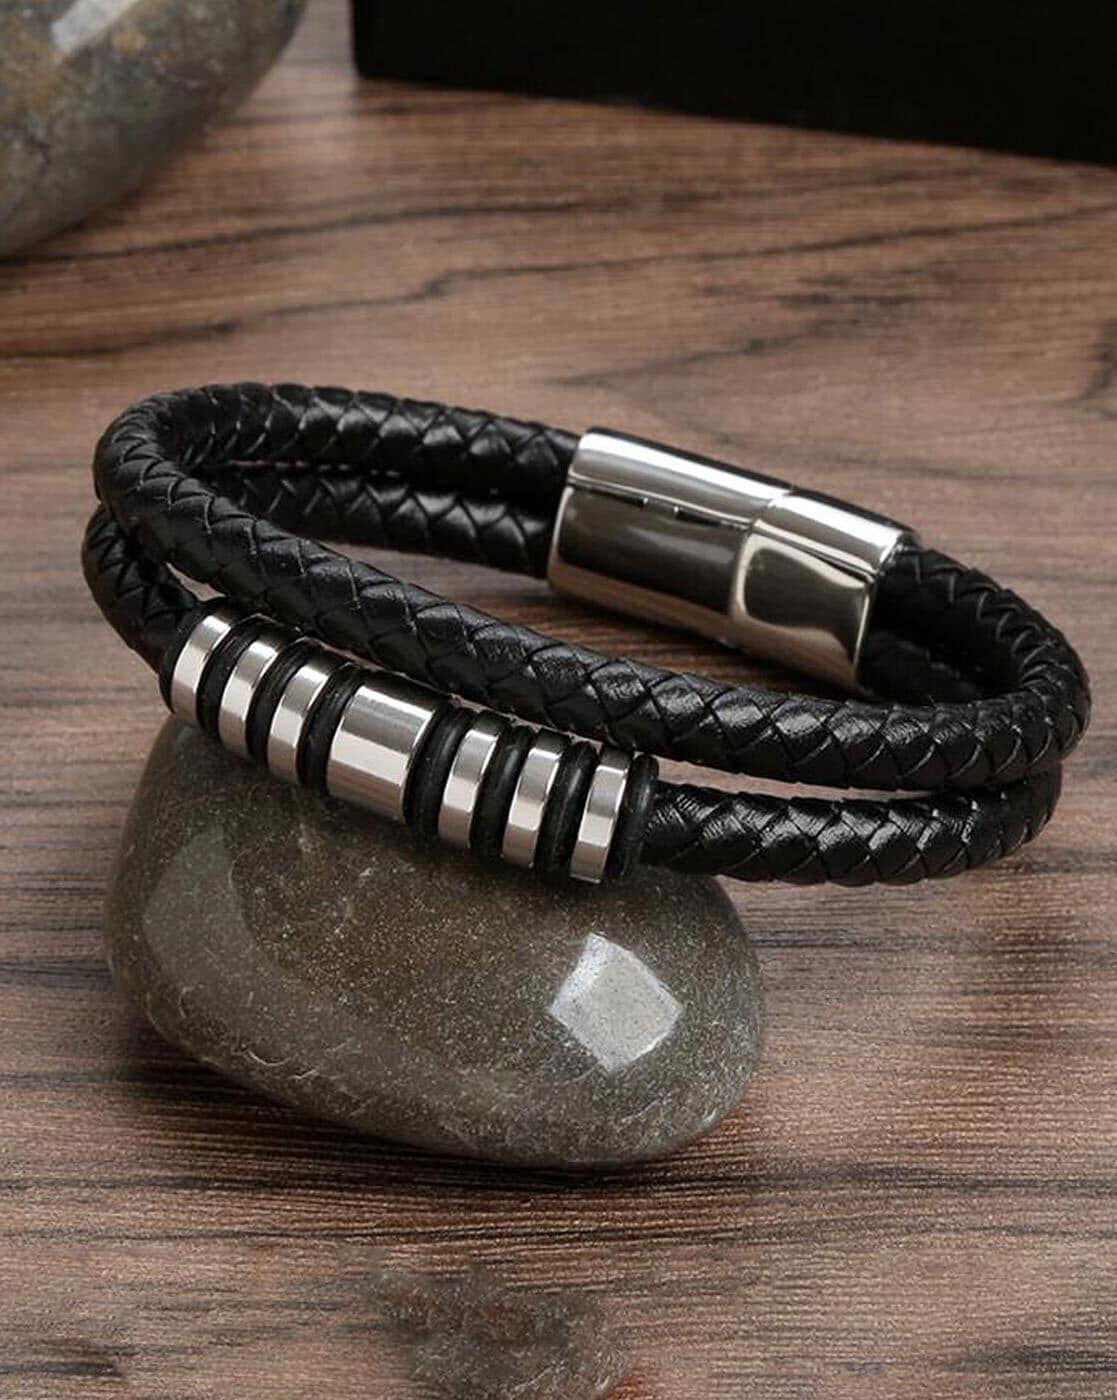 Fashion Frill Silver Plated Leather Bracelet For Men (Black, OS)